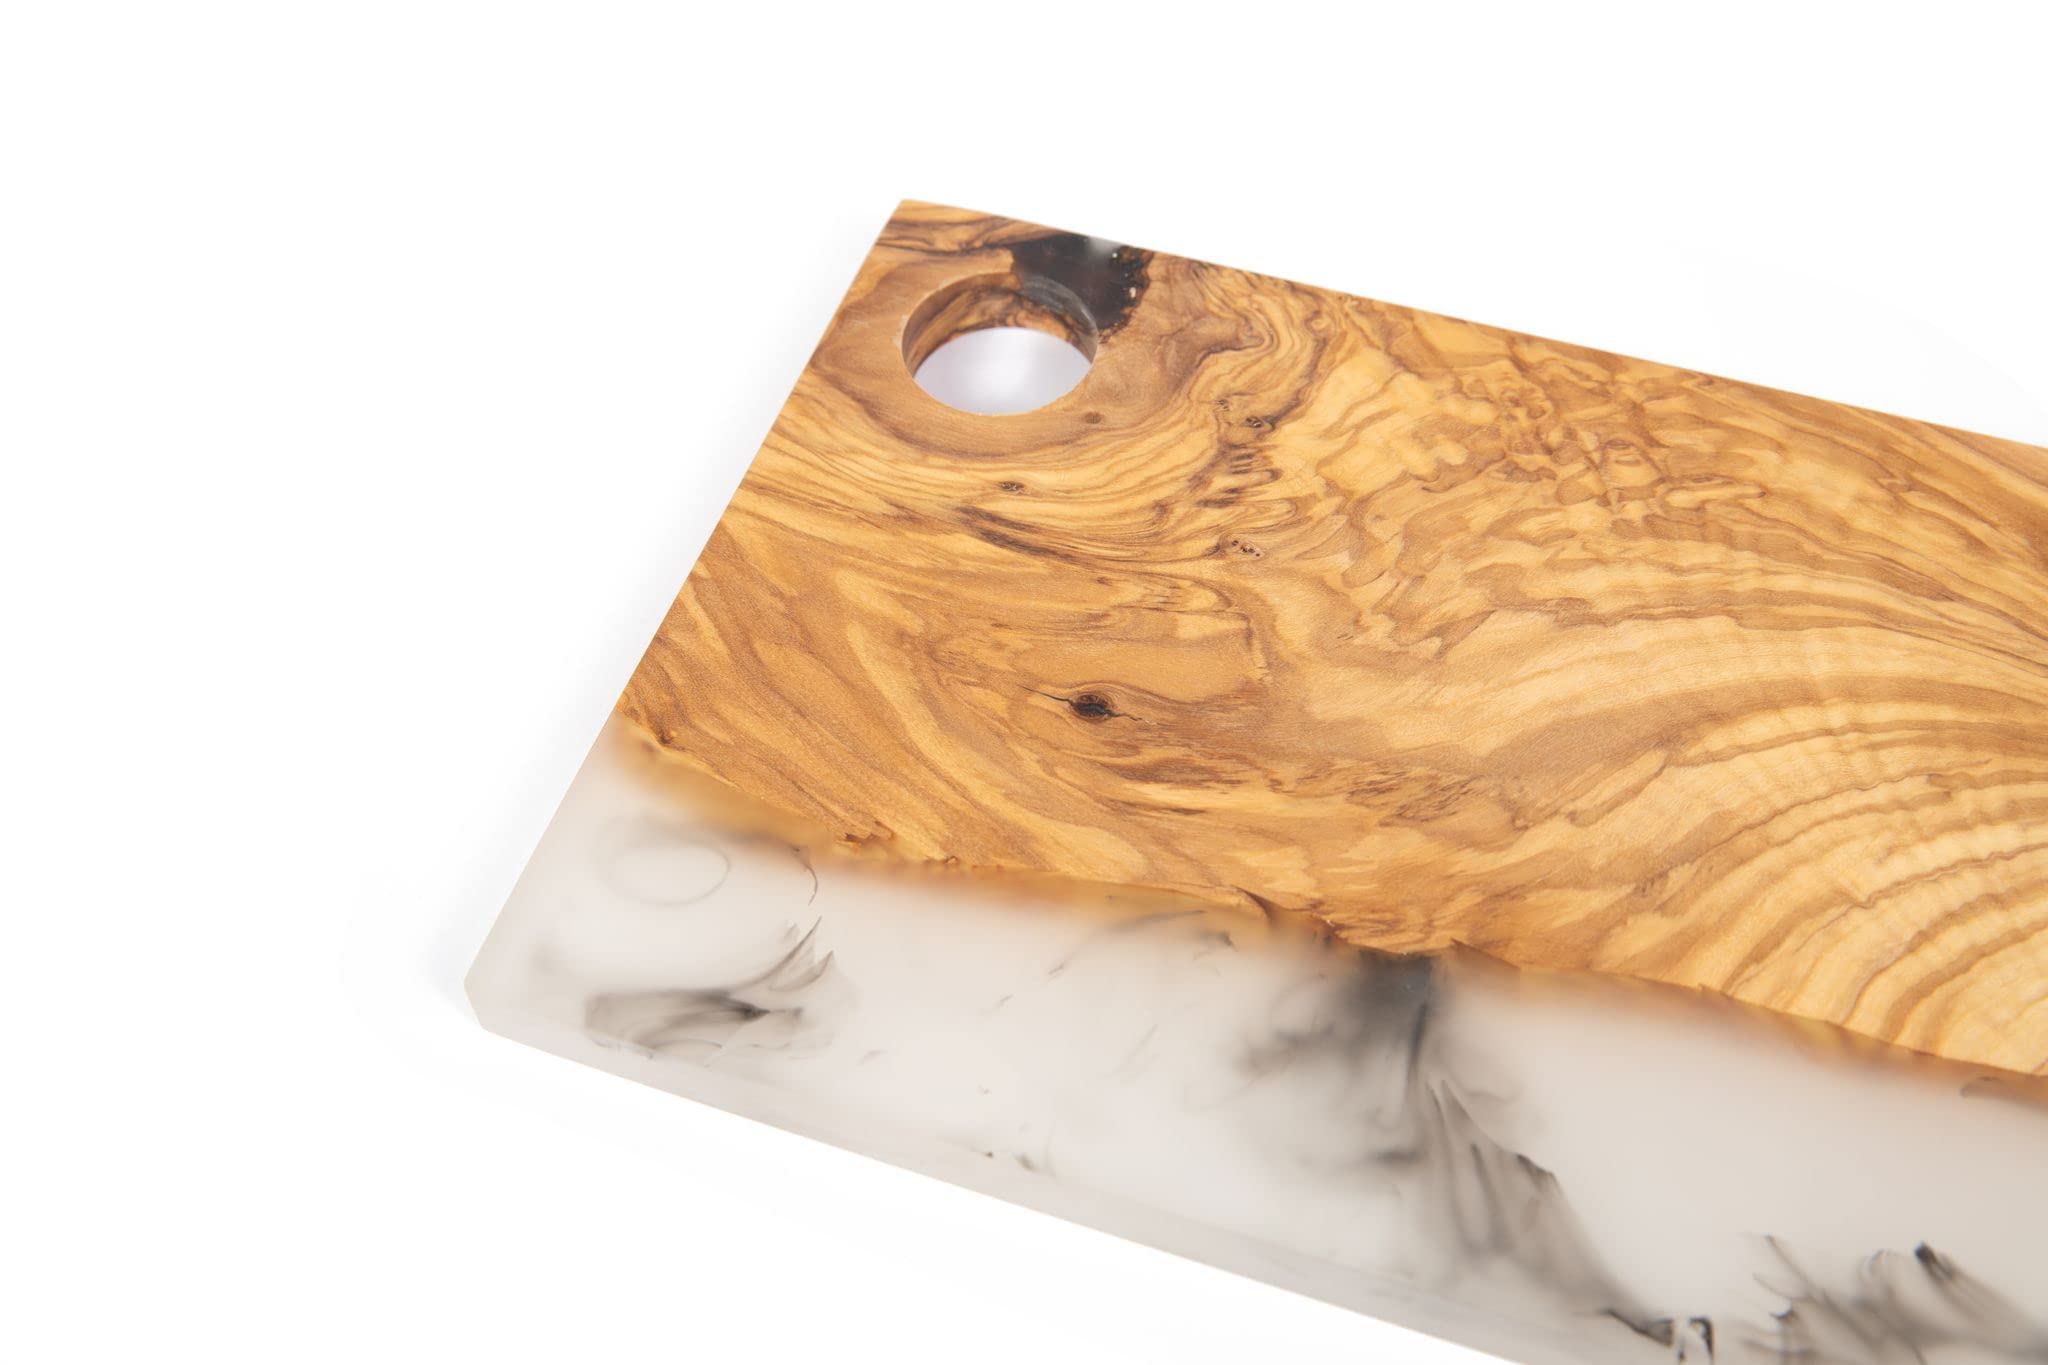 Urthwood Studios Handmade Olive Wood Charcuterie Board with Epoxy Resin, Cheese Boards & Party Serving Tray, Wooden Epoxy Serving Board, Meat Fruit Cheese Chopping and Cutting Board, Unique Gift